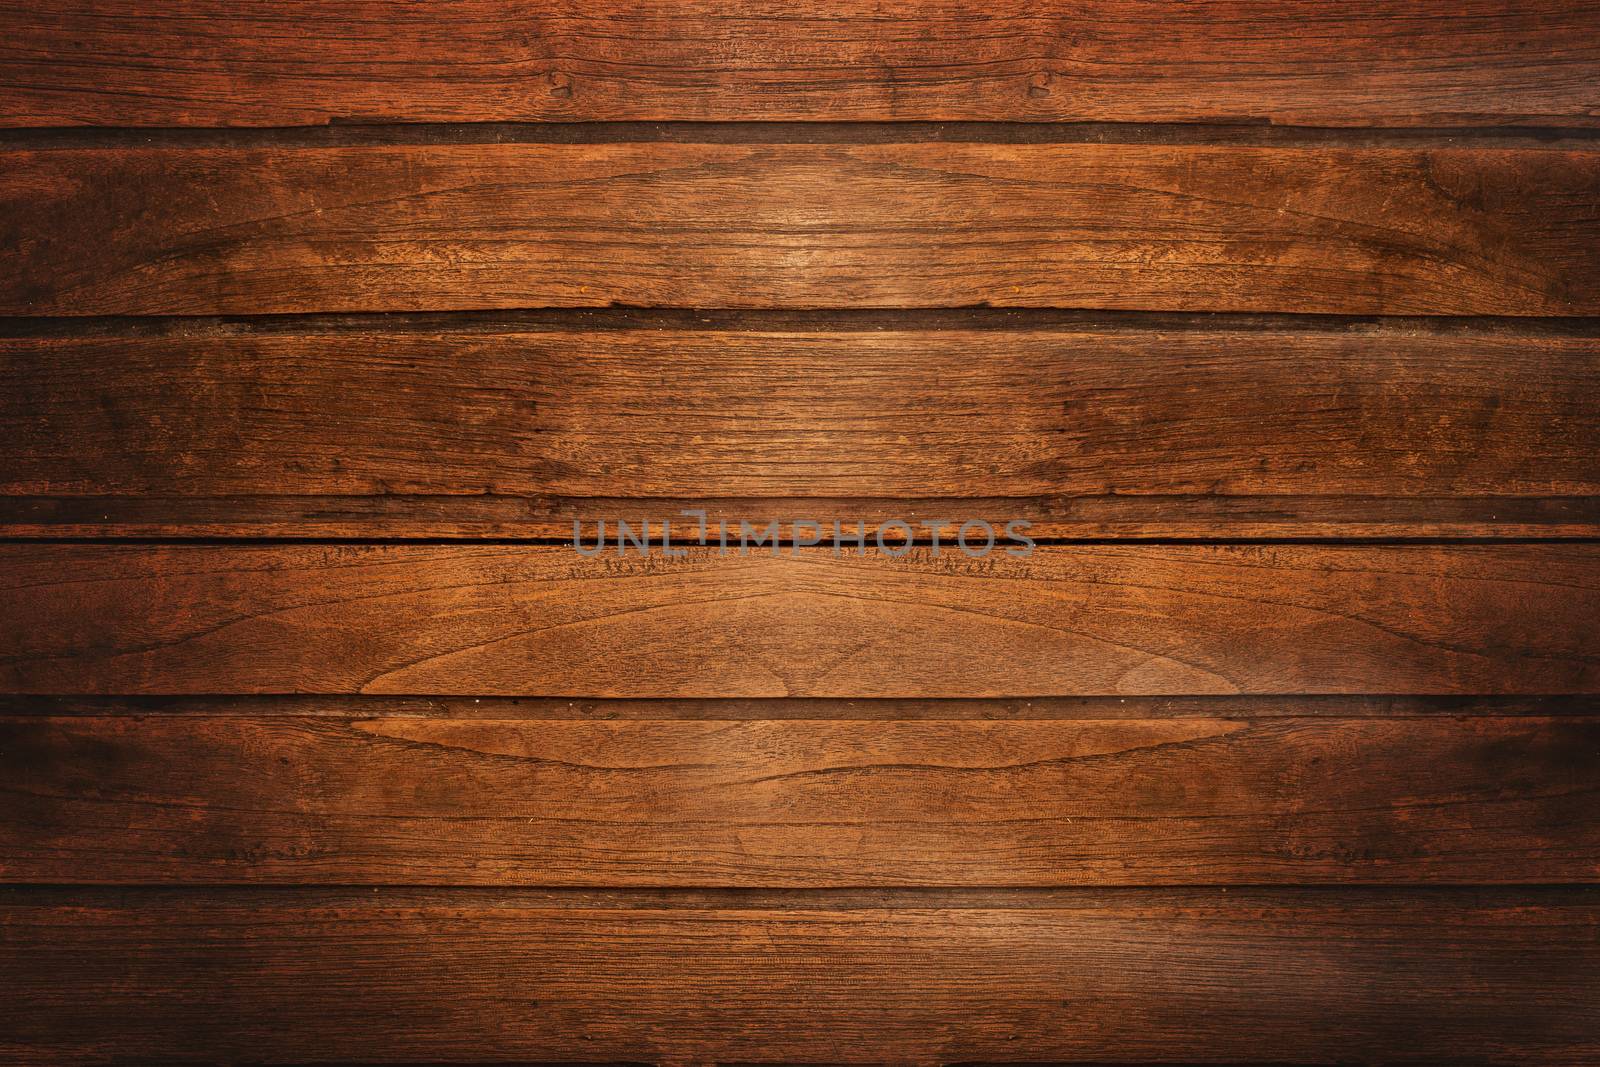 High resolution Wood Texture background by nopparats